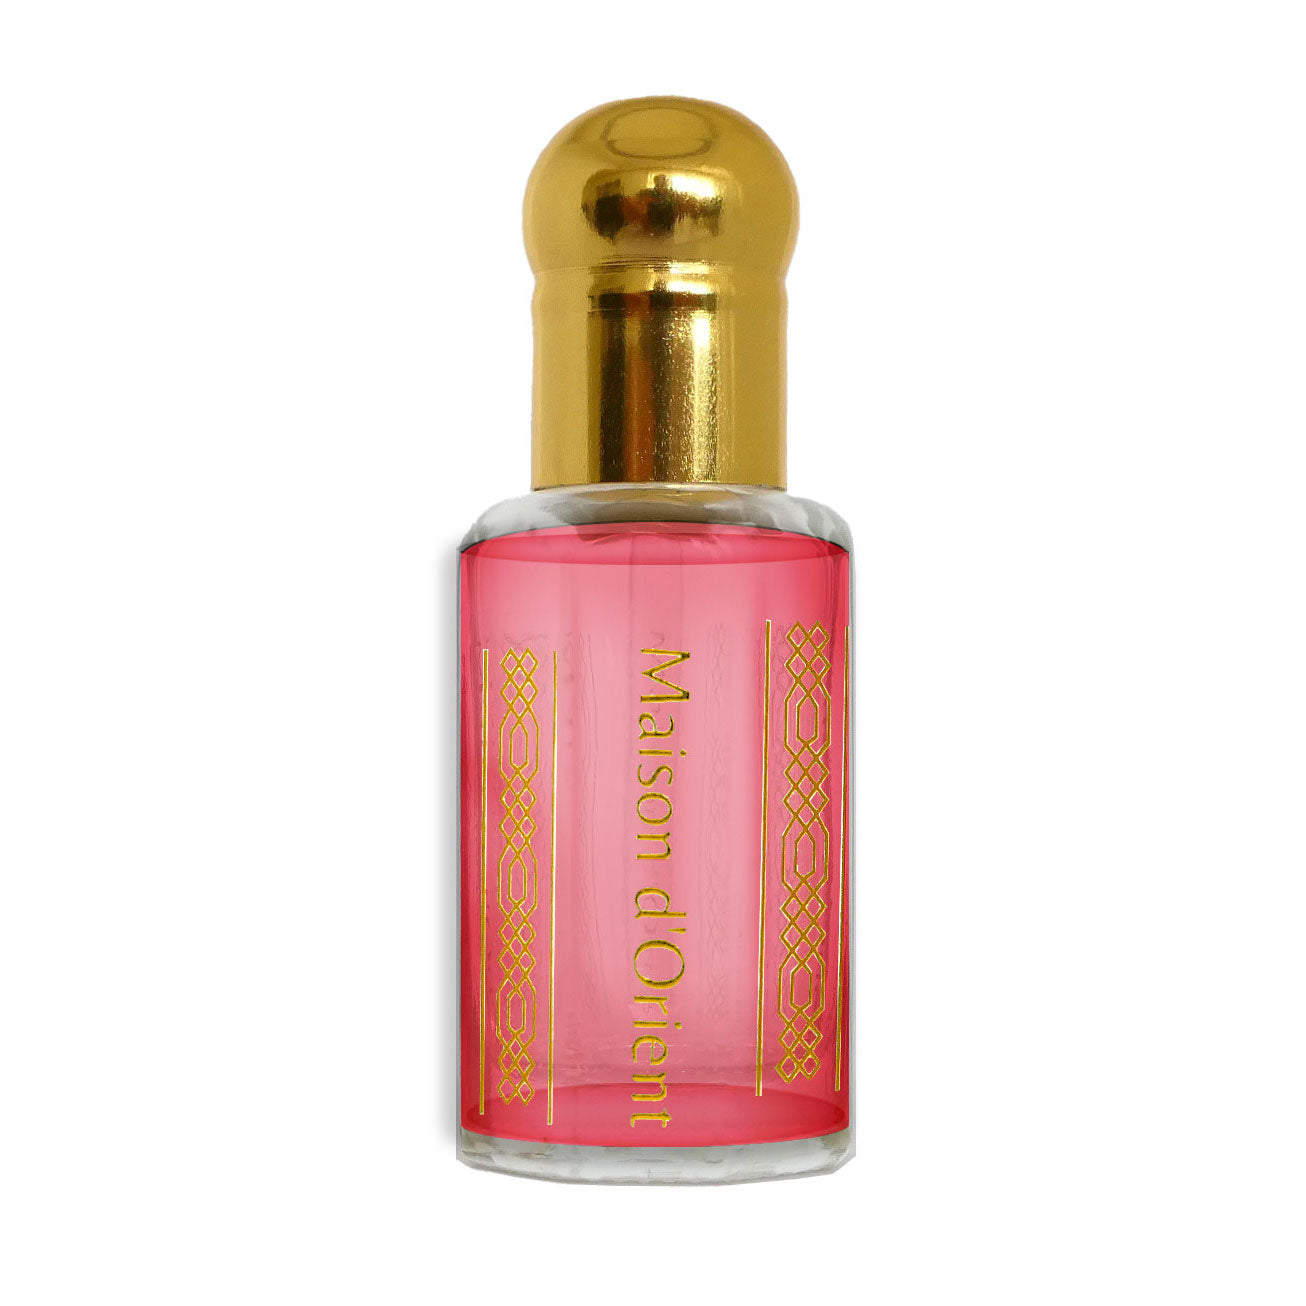 Maison d'Orient Musk Tahara Collection (White & Pink Musk) Alcohol Free Arabian Attar Perfume Oils - Vegan & Cruelty-Free Oriental Blends, Size: 2 x